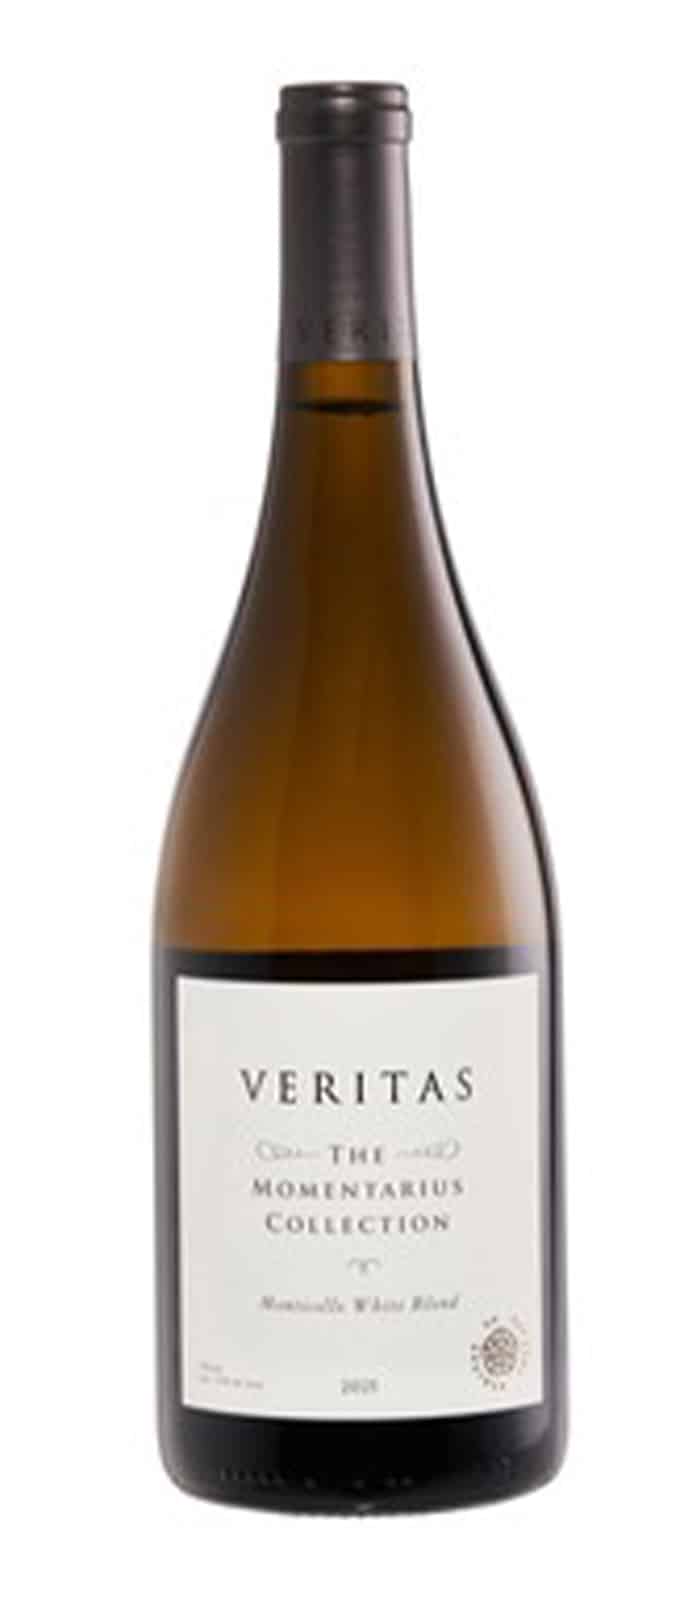 Veritas Vineyards Momentarius Collection, Gold Medal, Virginia Governor's Cup Wine Competition.